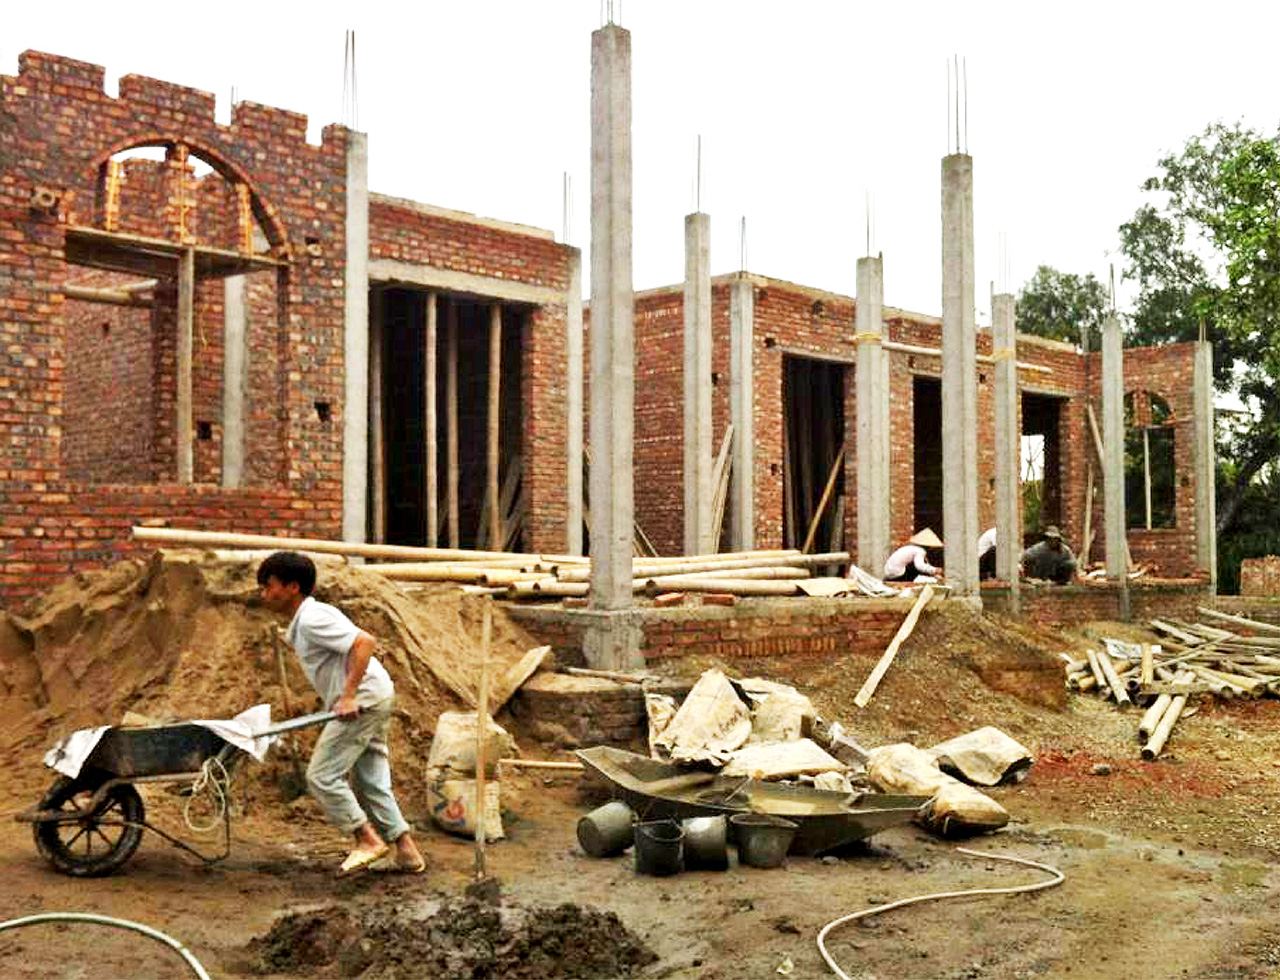 A fundraising project to help build a new home for Xuy Xa Orphanage in Vietnam